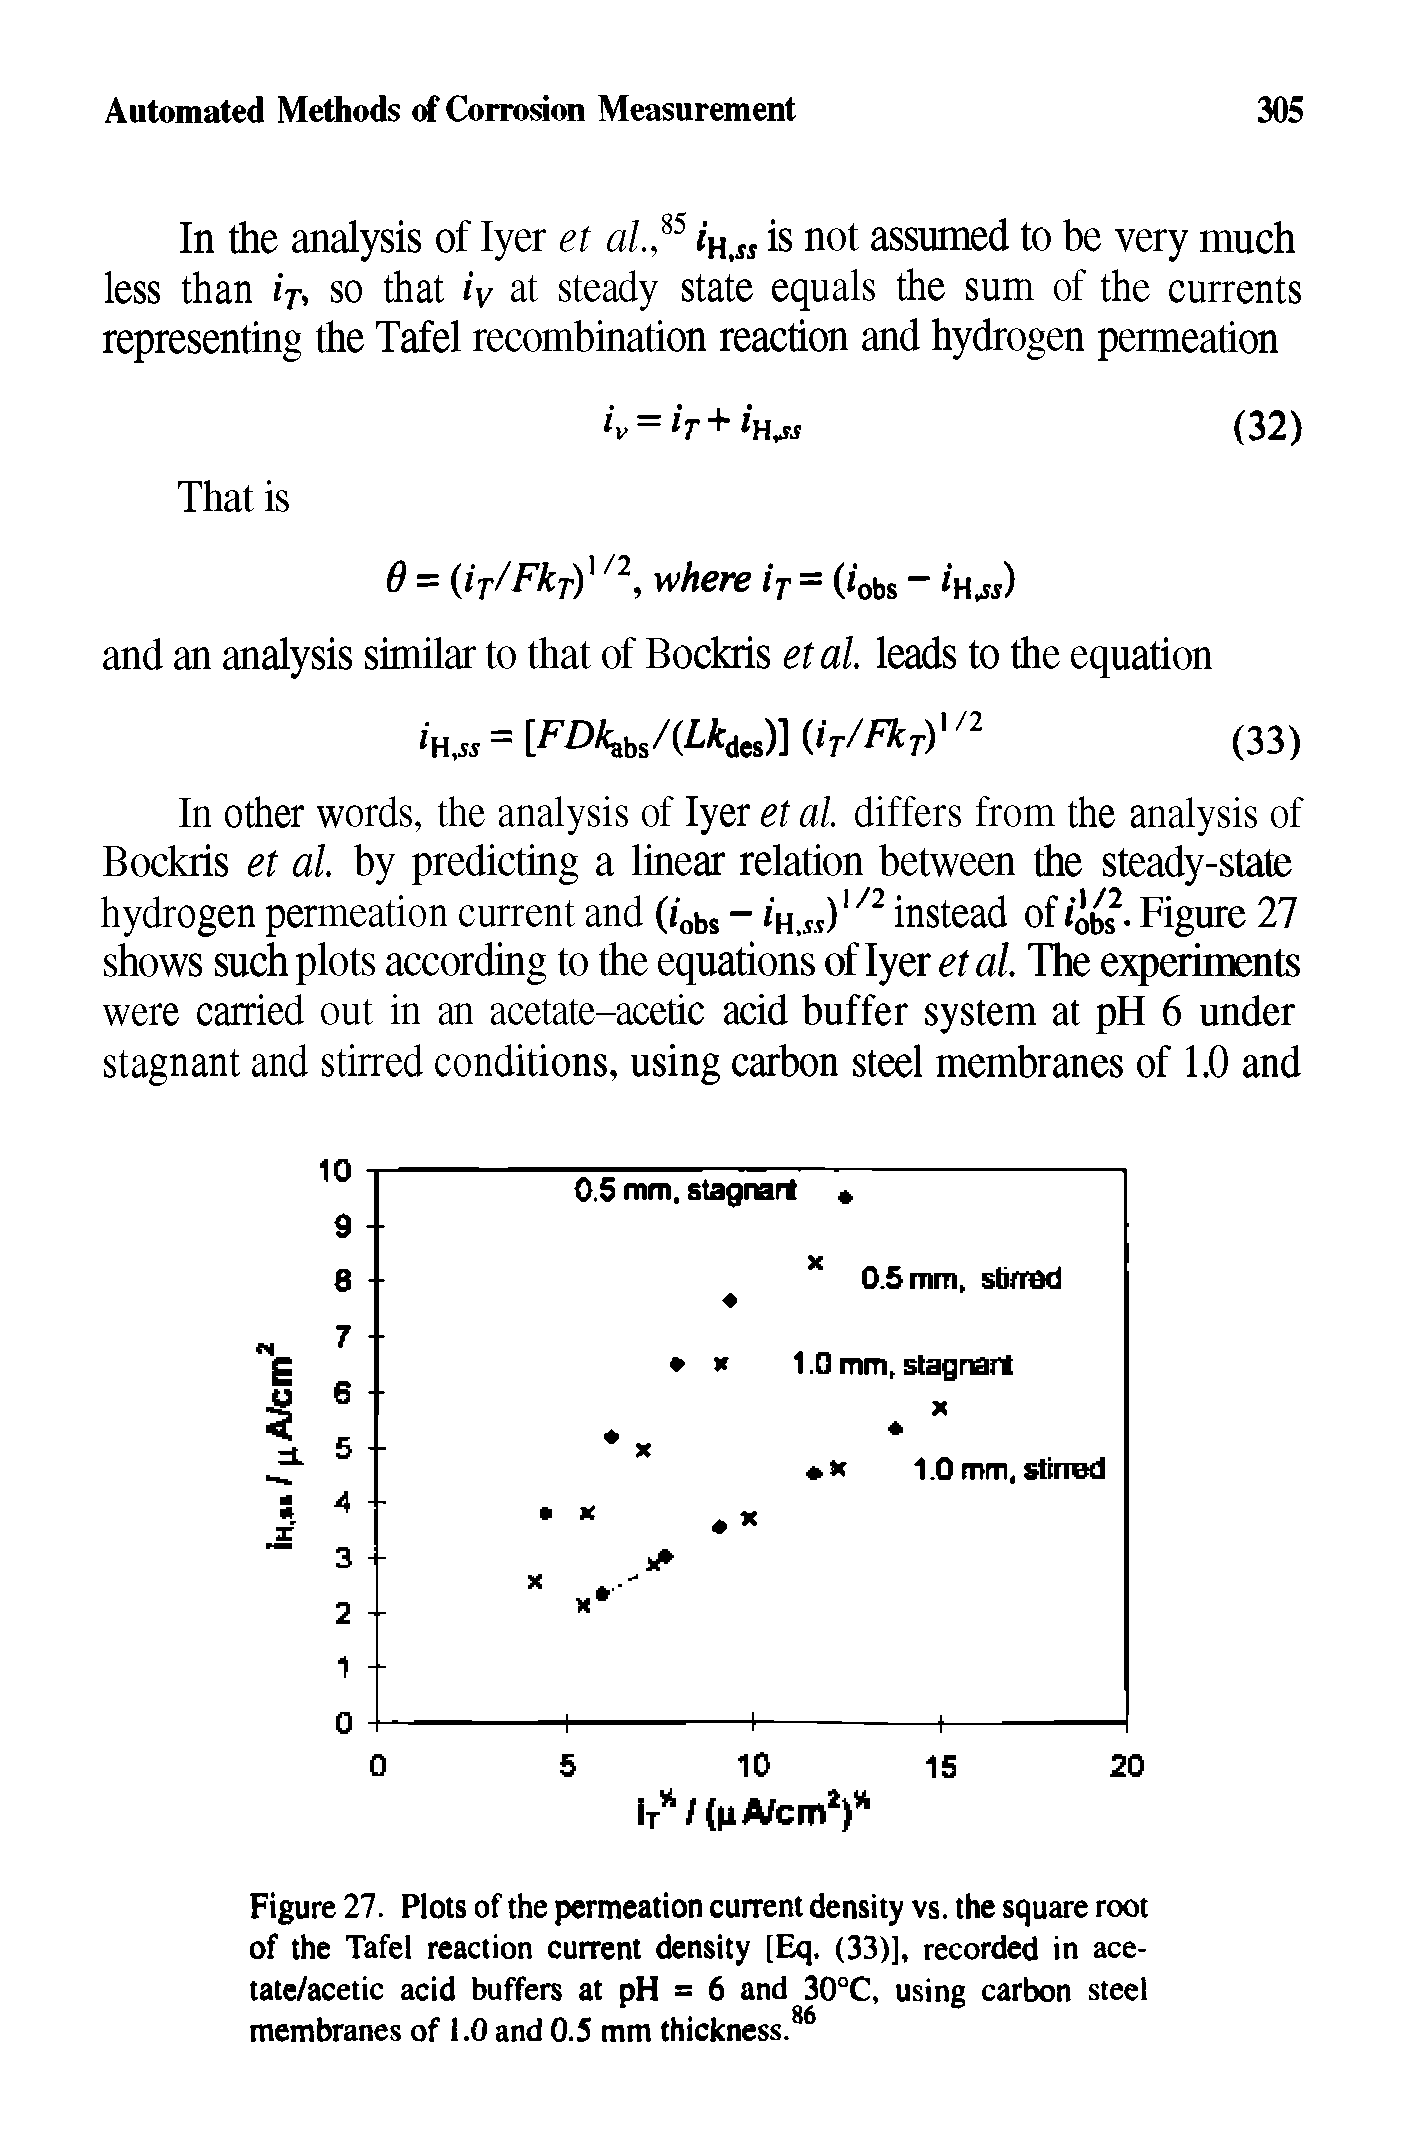 Figure 27. Plots of the permeation current density vs. the square root of the Tafel reaction current density [Eq. (33)], recorded in ace-tate/acetic acid buffers at pH = 6 and 30°C, using carbon steel membranes of 1.0 and 0.5 mm thickness. ...